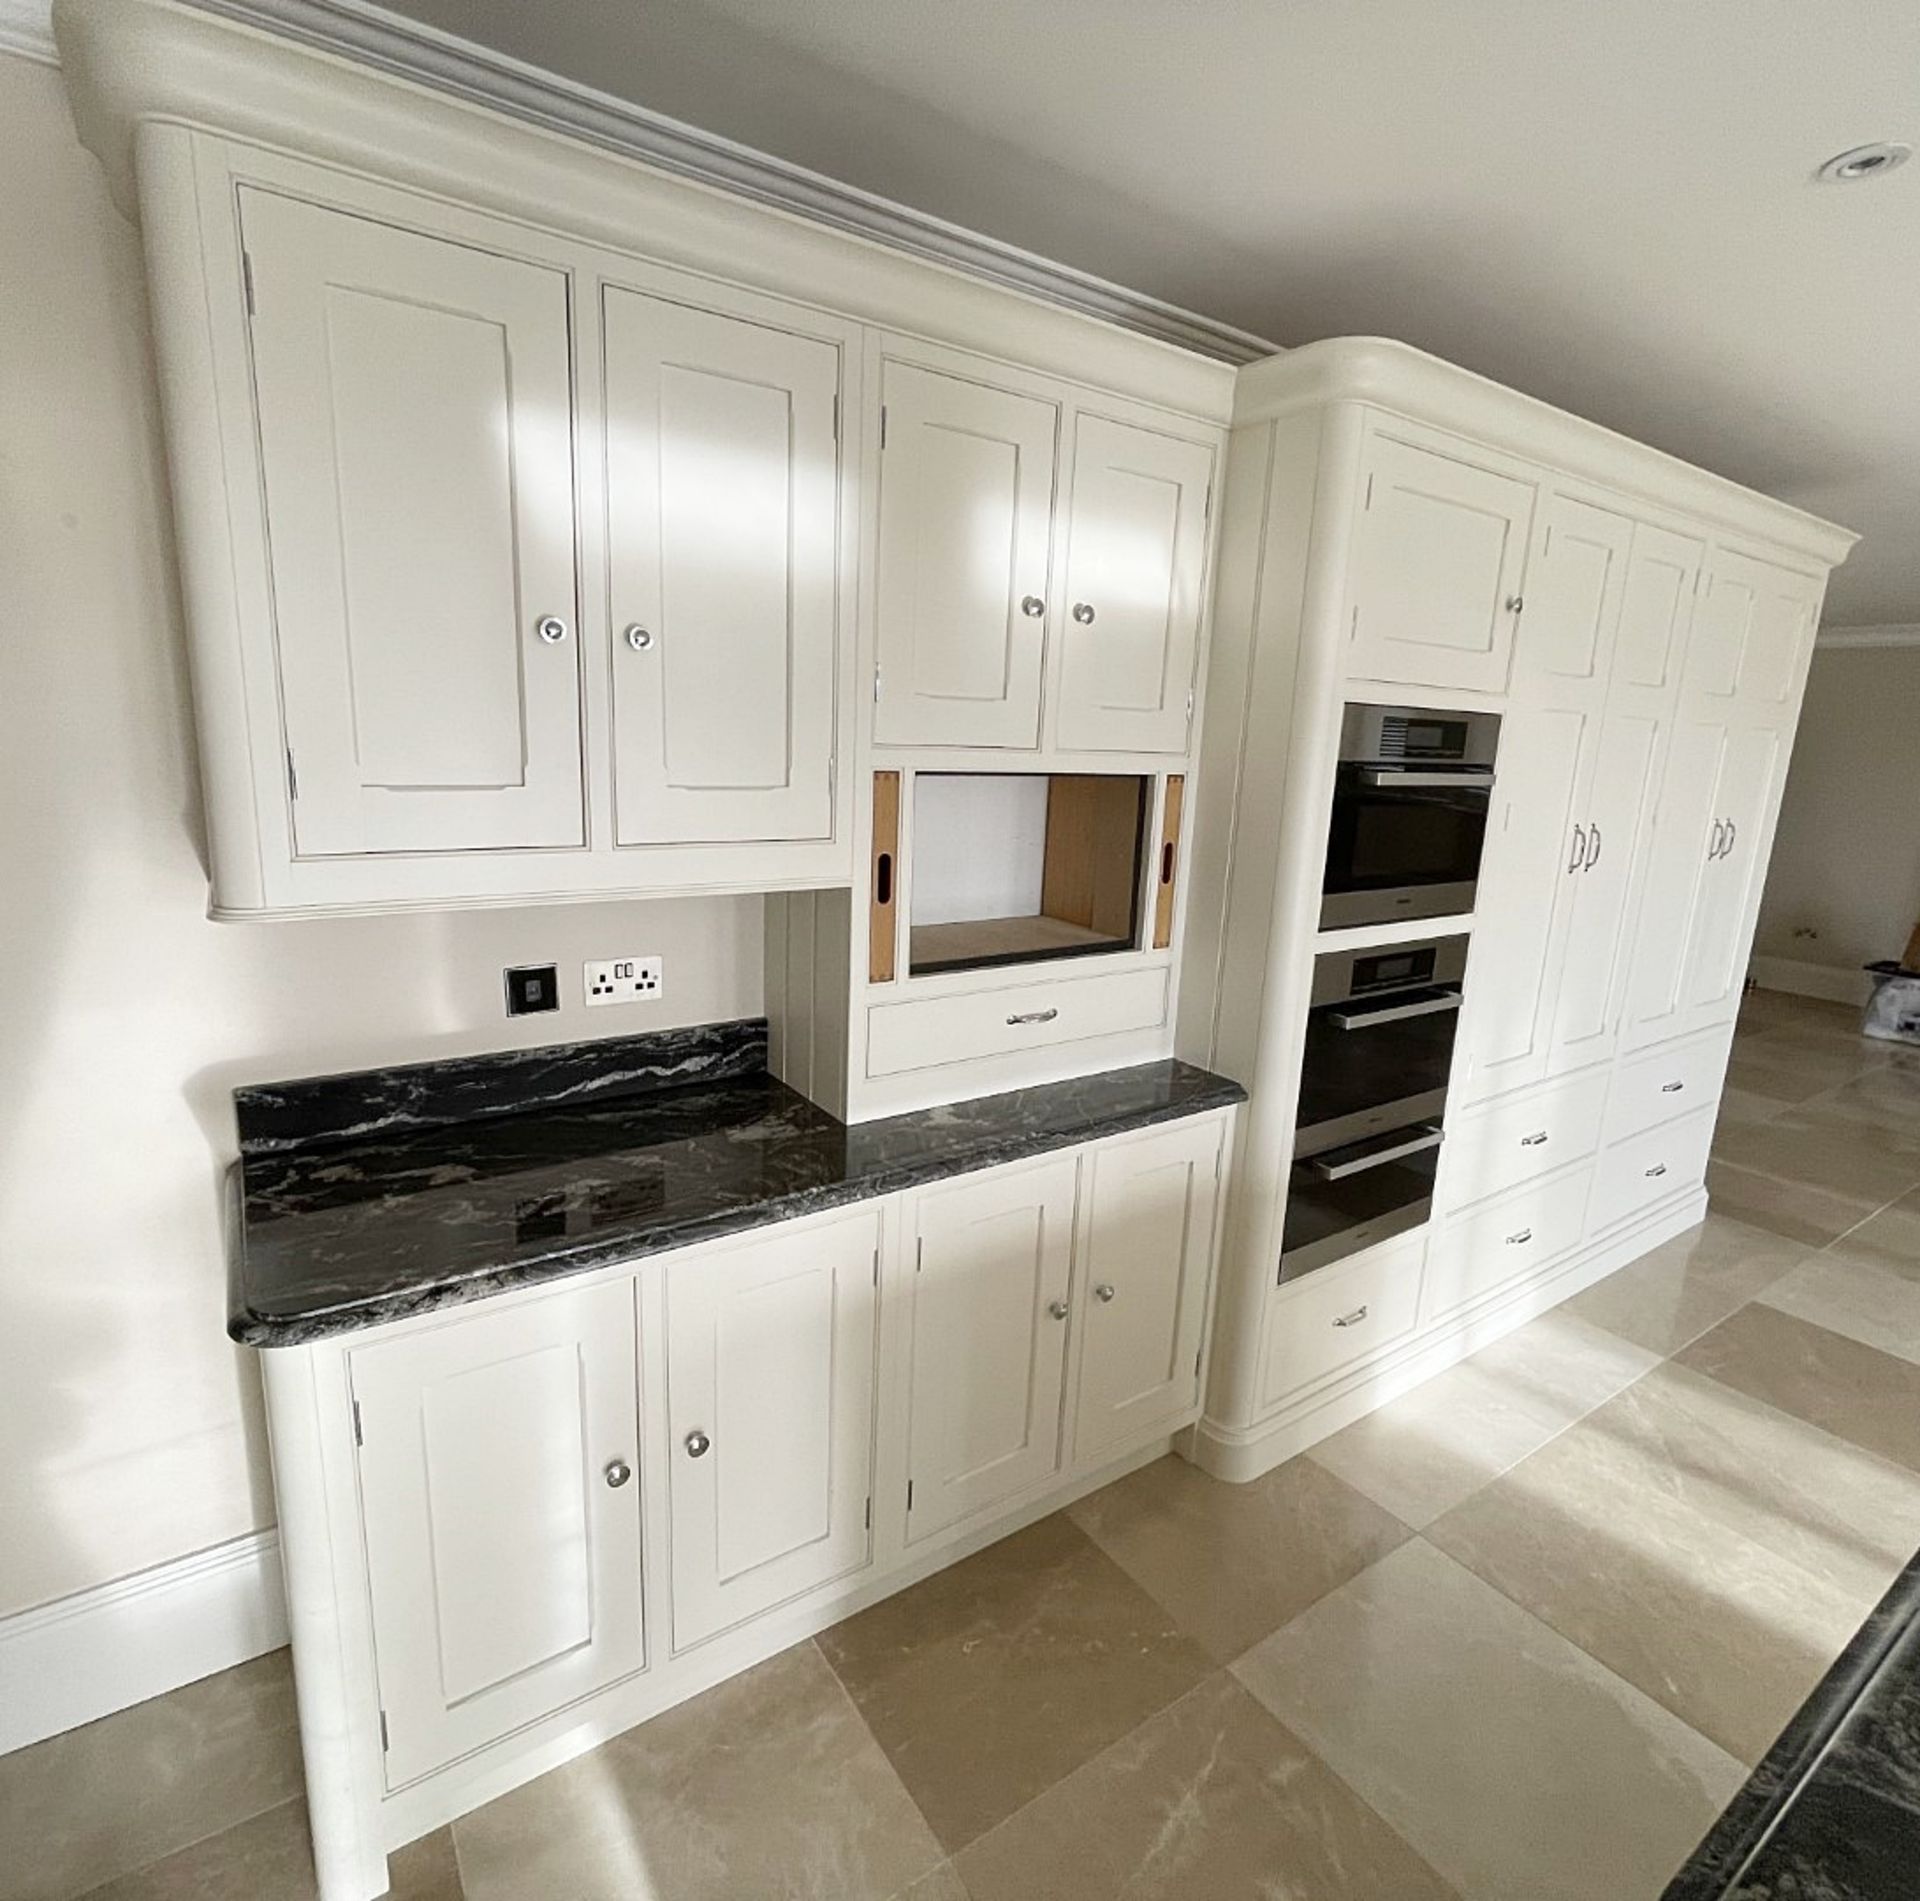 1 x Bespoke Handcrafted Shaker-style Fitted Kitchen Marble Surfaces, Island & Miele Appliances - Image 131 of 221